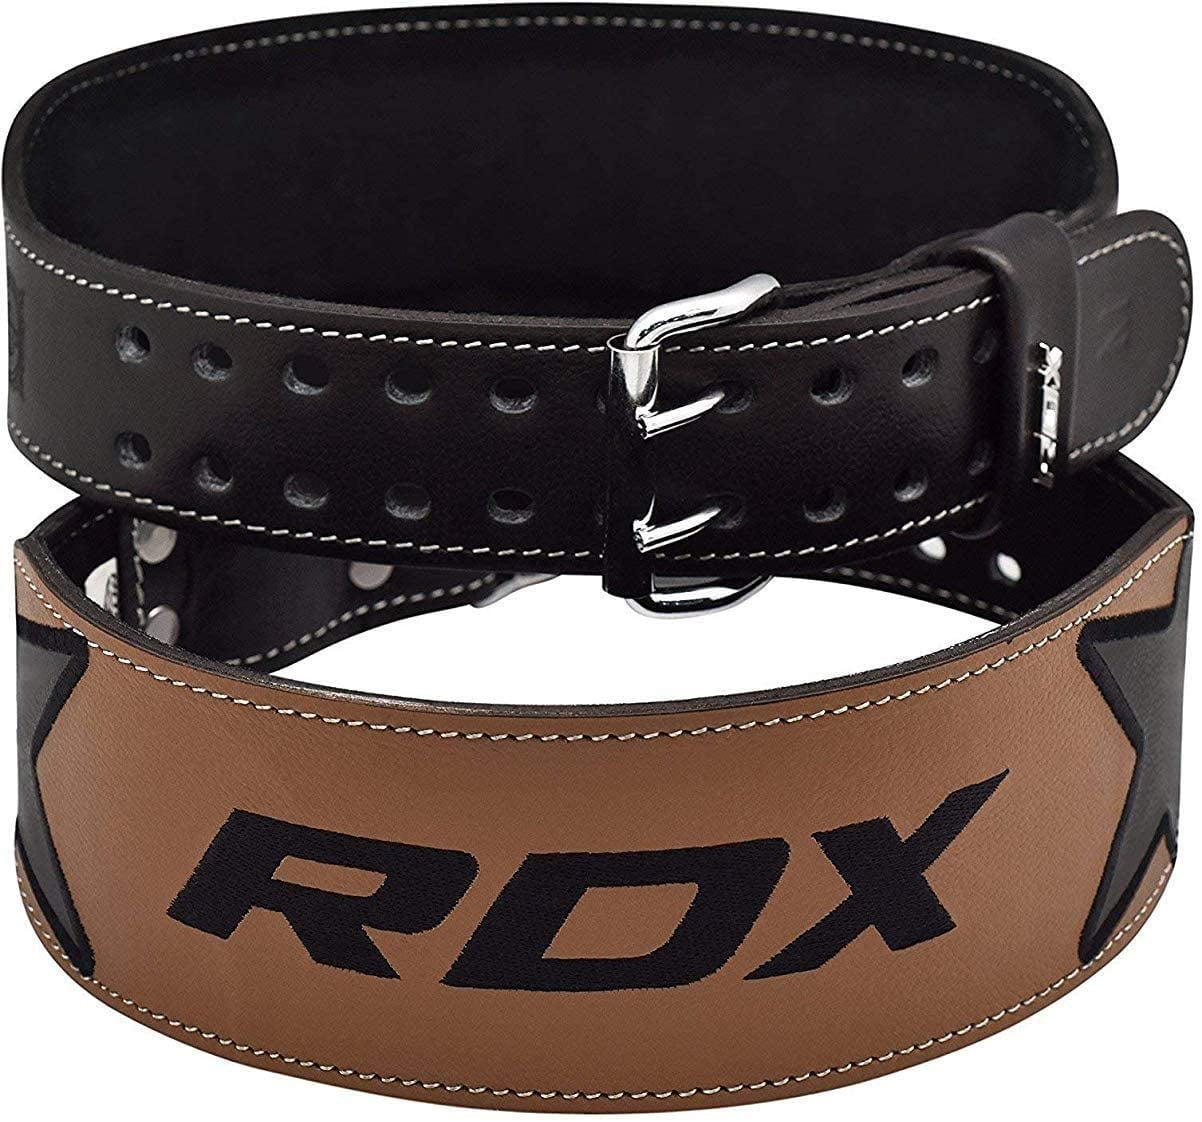 RDX Weight Lifting Belt 6 Cow Hide Leather Back Gym Training Support Fitness Exercise Bodybuilding